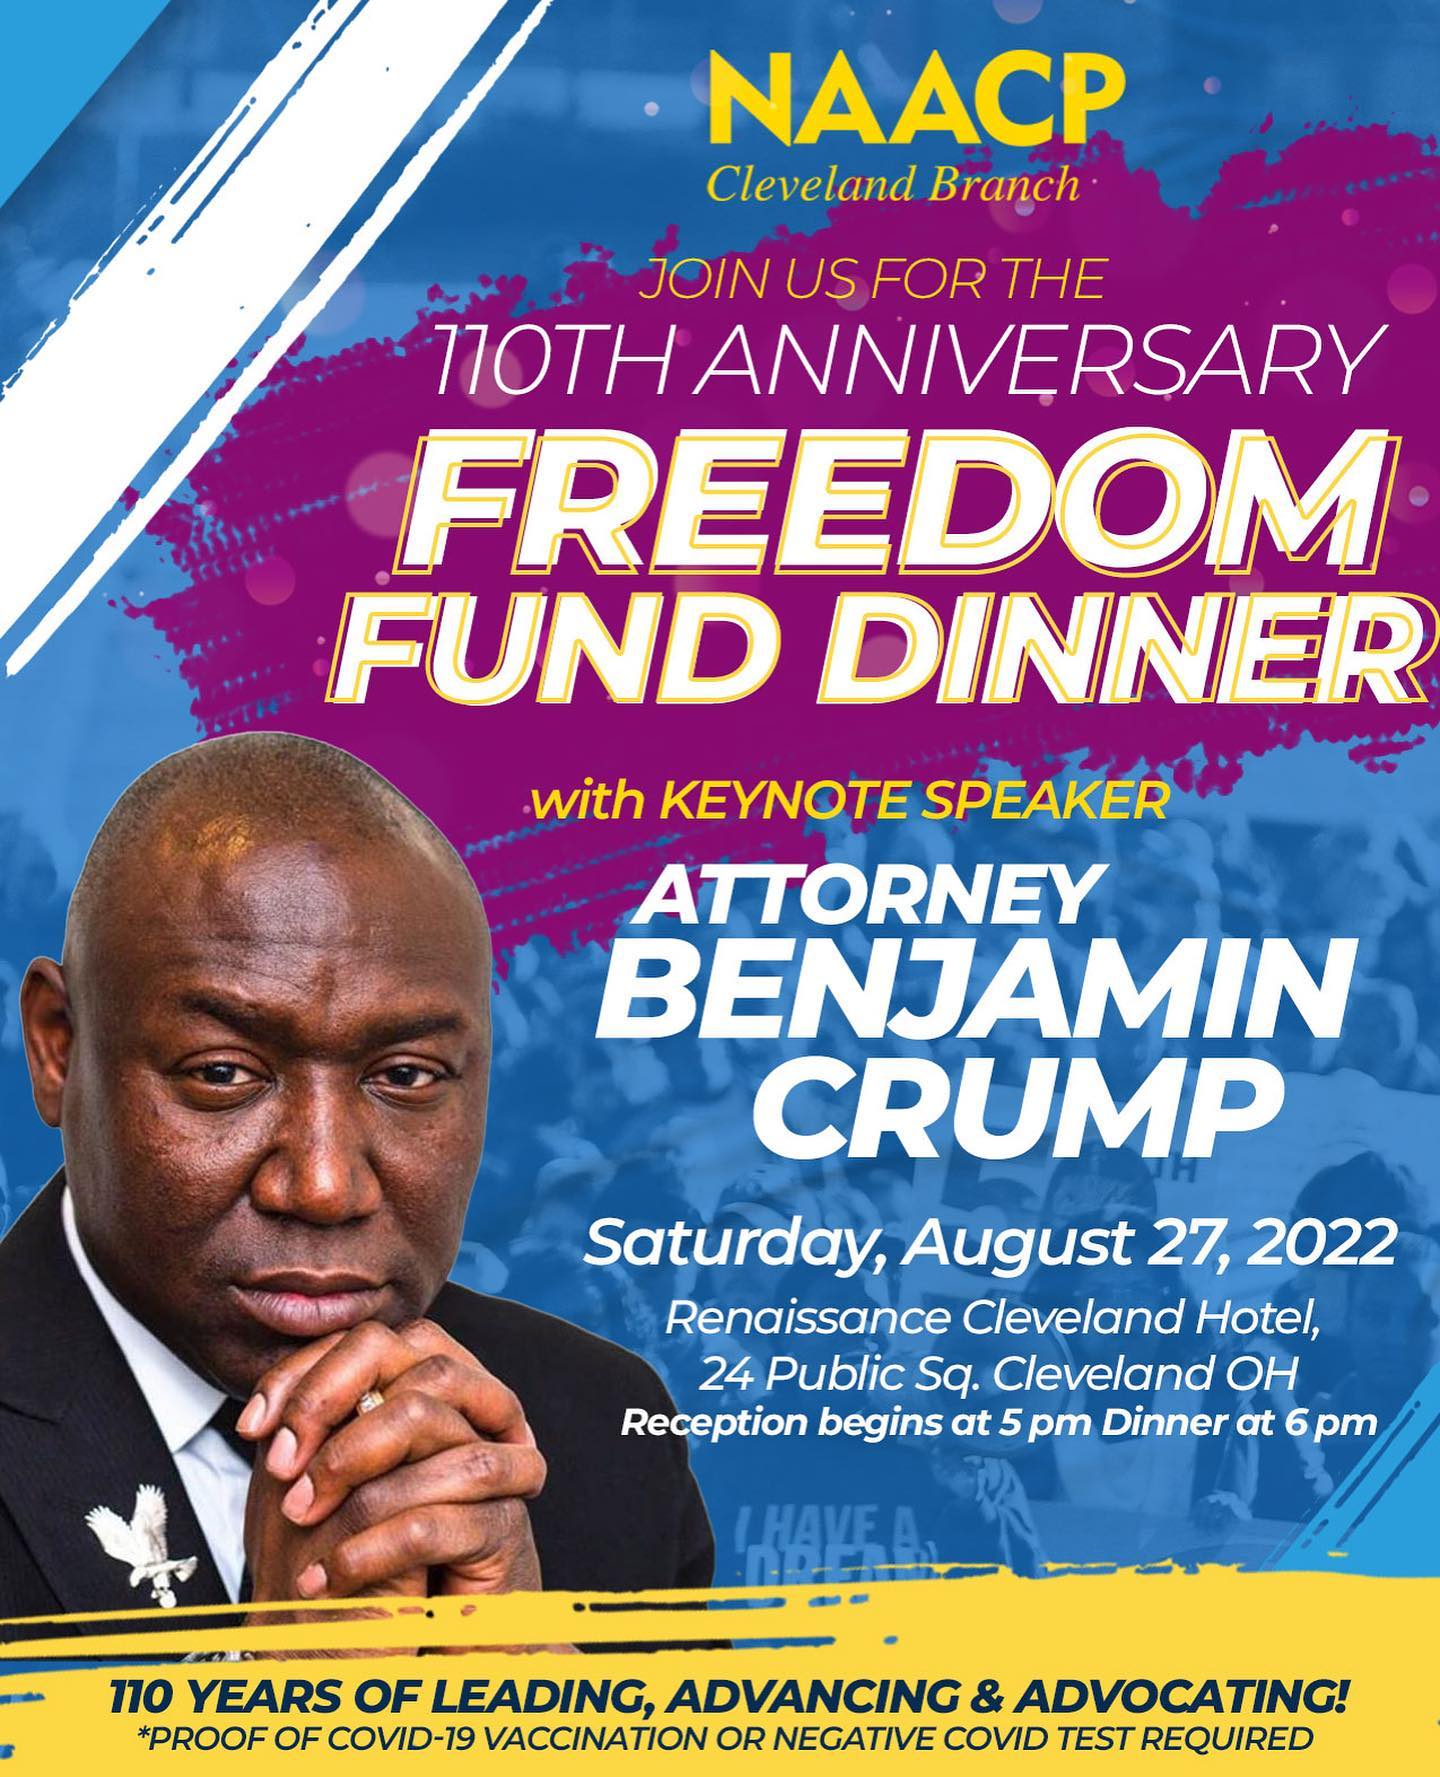 🎙In less than 3 weeks we will celebrate the 110th Anniversary Freedom Fund Dinner! 

The dynamic @attorneycrump will be our keynote speaker. You DON’T want to miss this!

Join us for this joyous occasion celebrating our Black Excellence of LEADING, ADVANCING, & ADVOCATING! 

Be sure to grab your ticket today! The link is in our profile bio ⬆️ above. 
🎟Individual tickets are now available🎟

See you there! 

#NaacpCleveland 
#OhioEvents
#NAACPCLE110